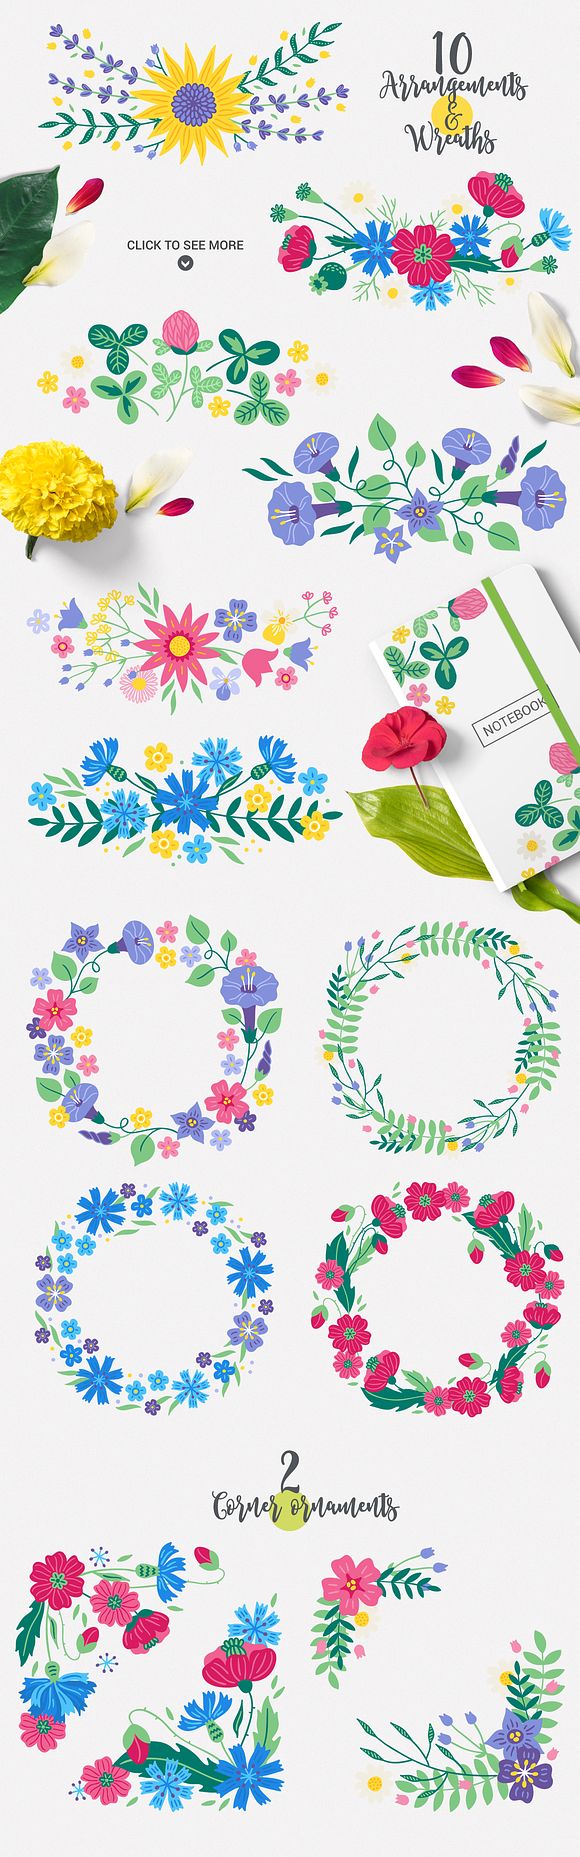 Floral Meadow Kit in Illustrations - product preview 1